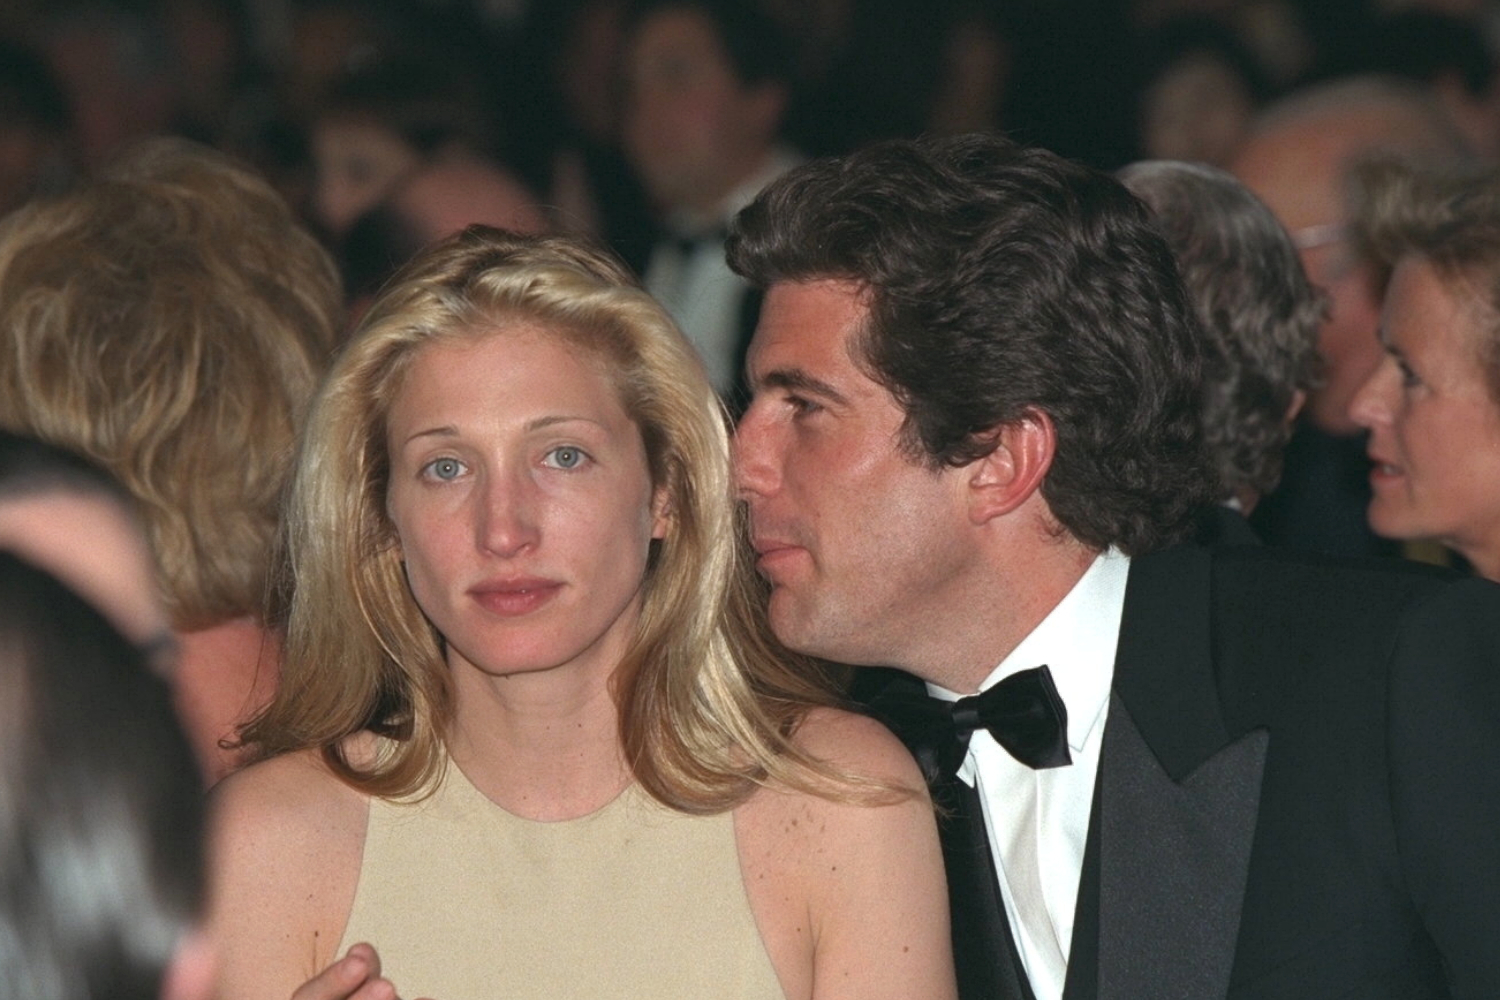 Carolyn Bessette left JFK Jr. furious after kissing another man, new book  claims